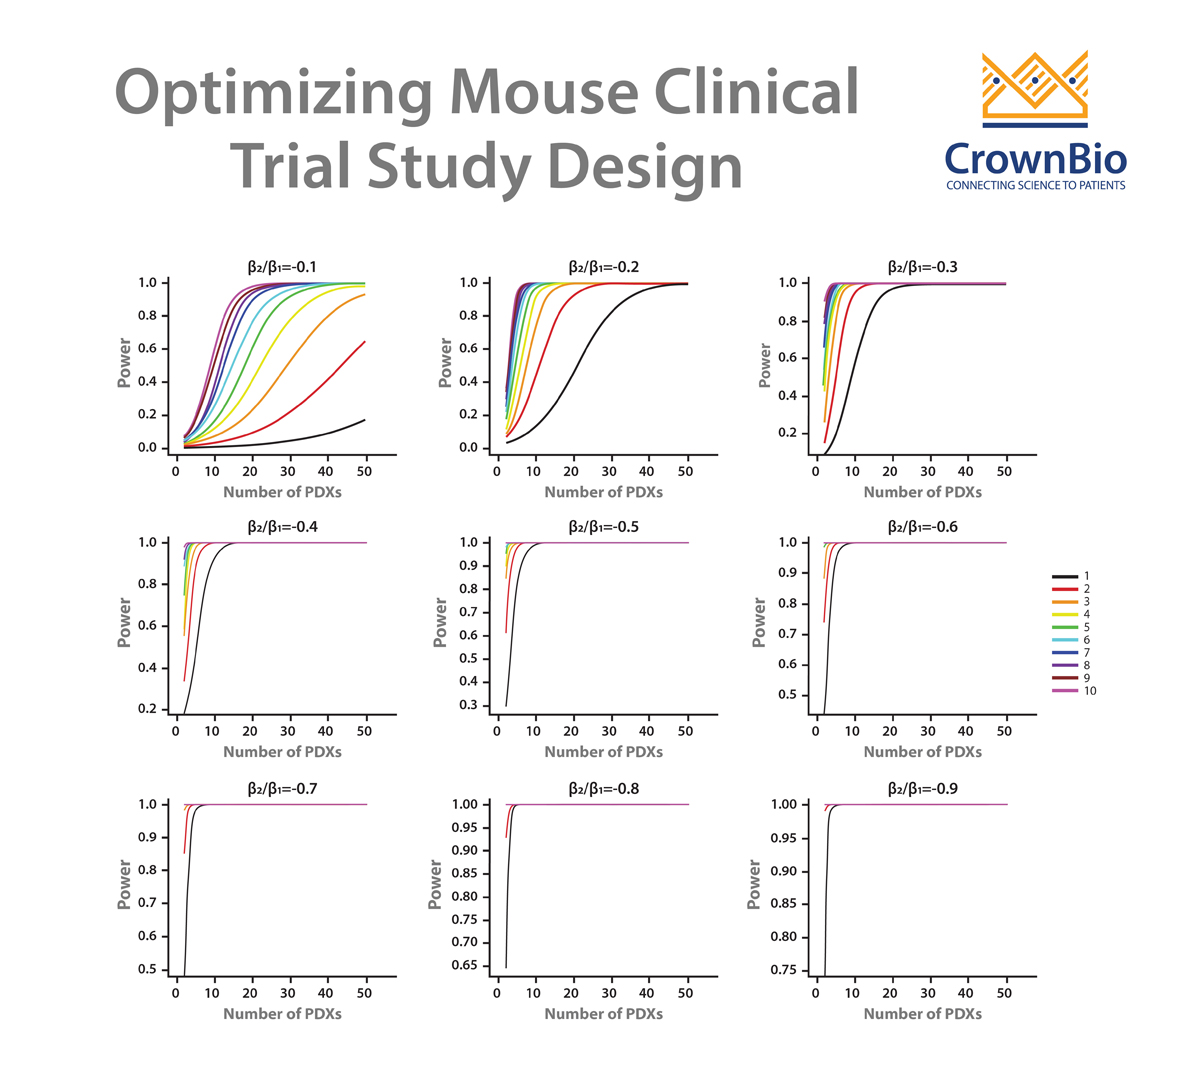 How to Optimize Mouse Clinical Trial Study Design